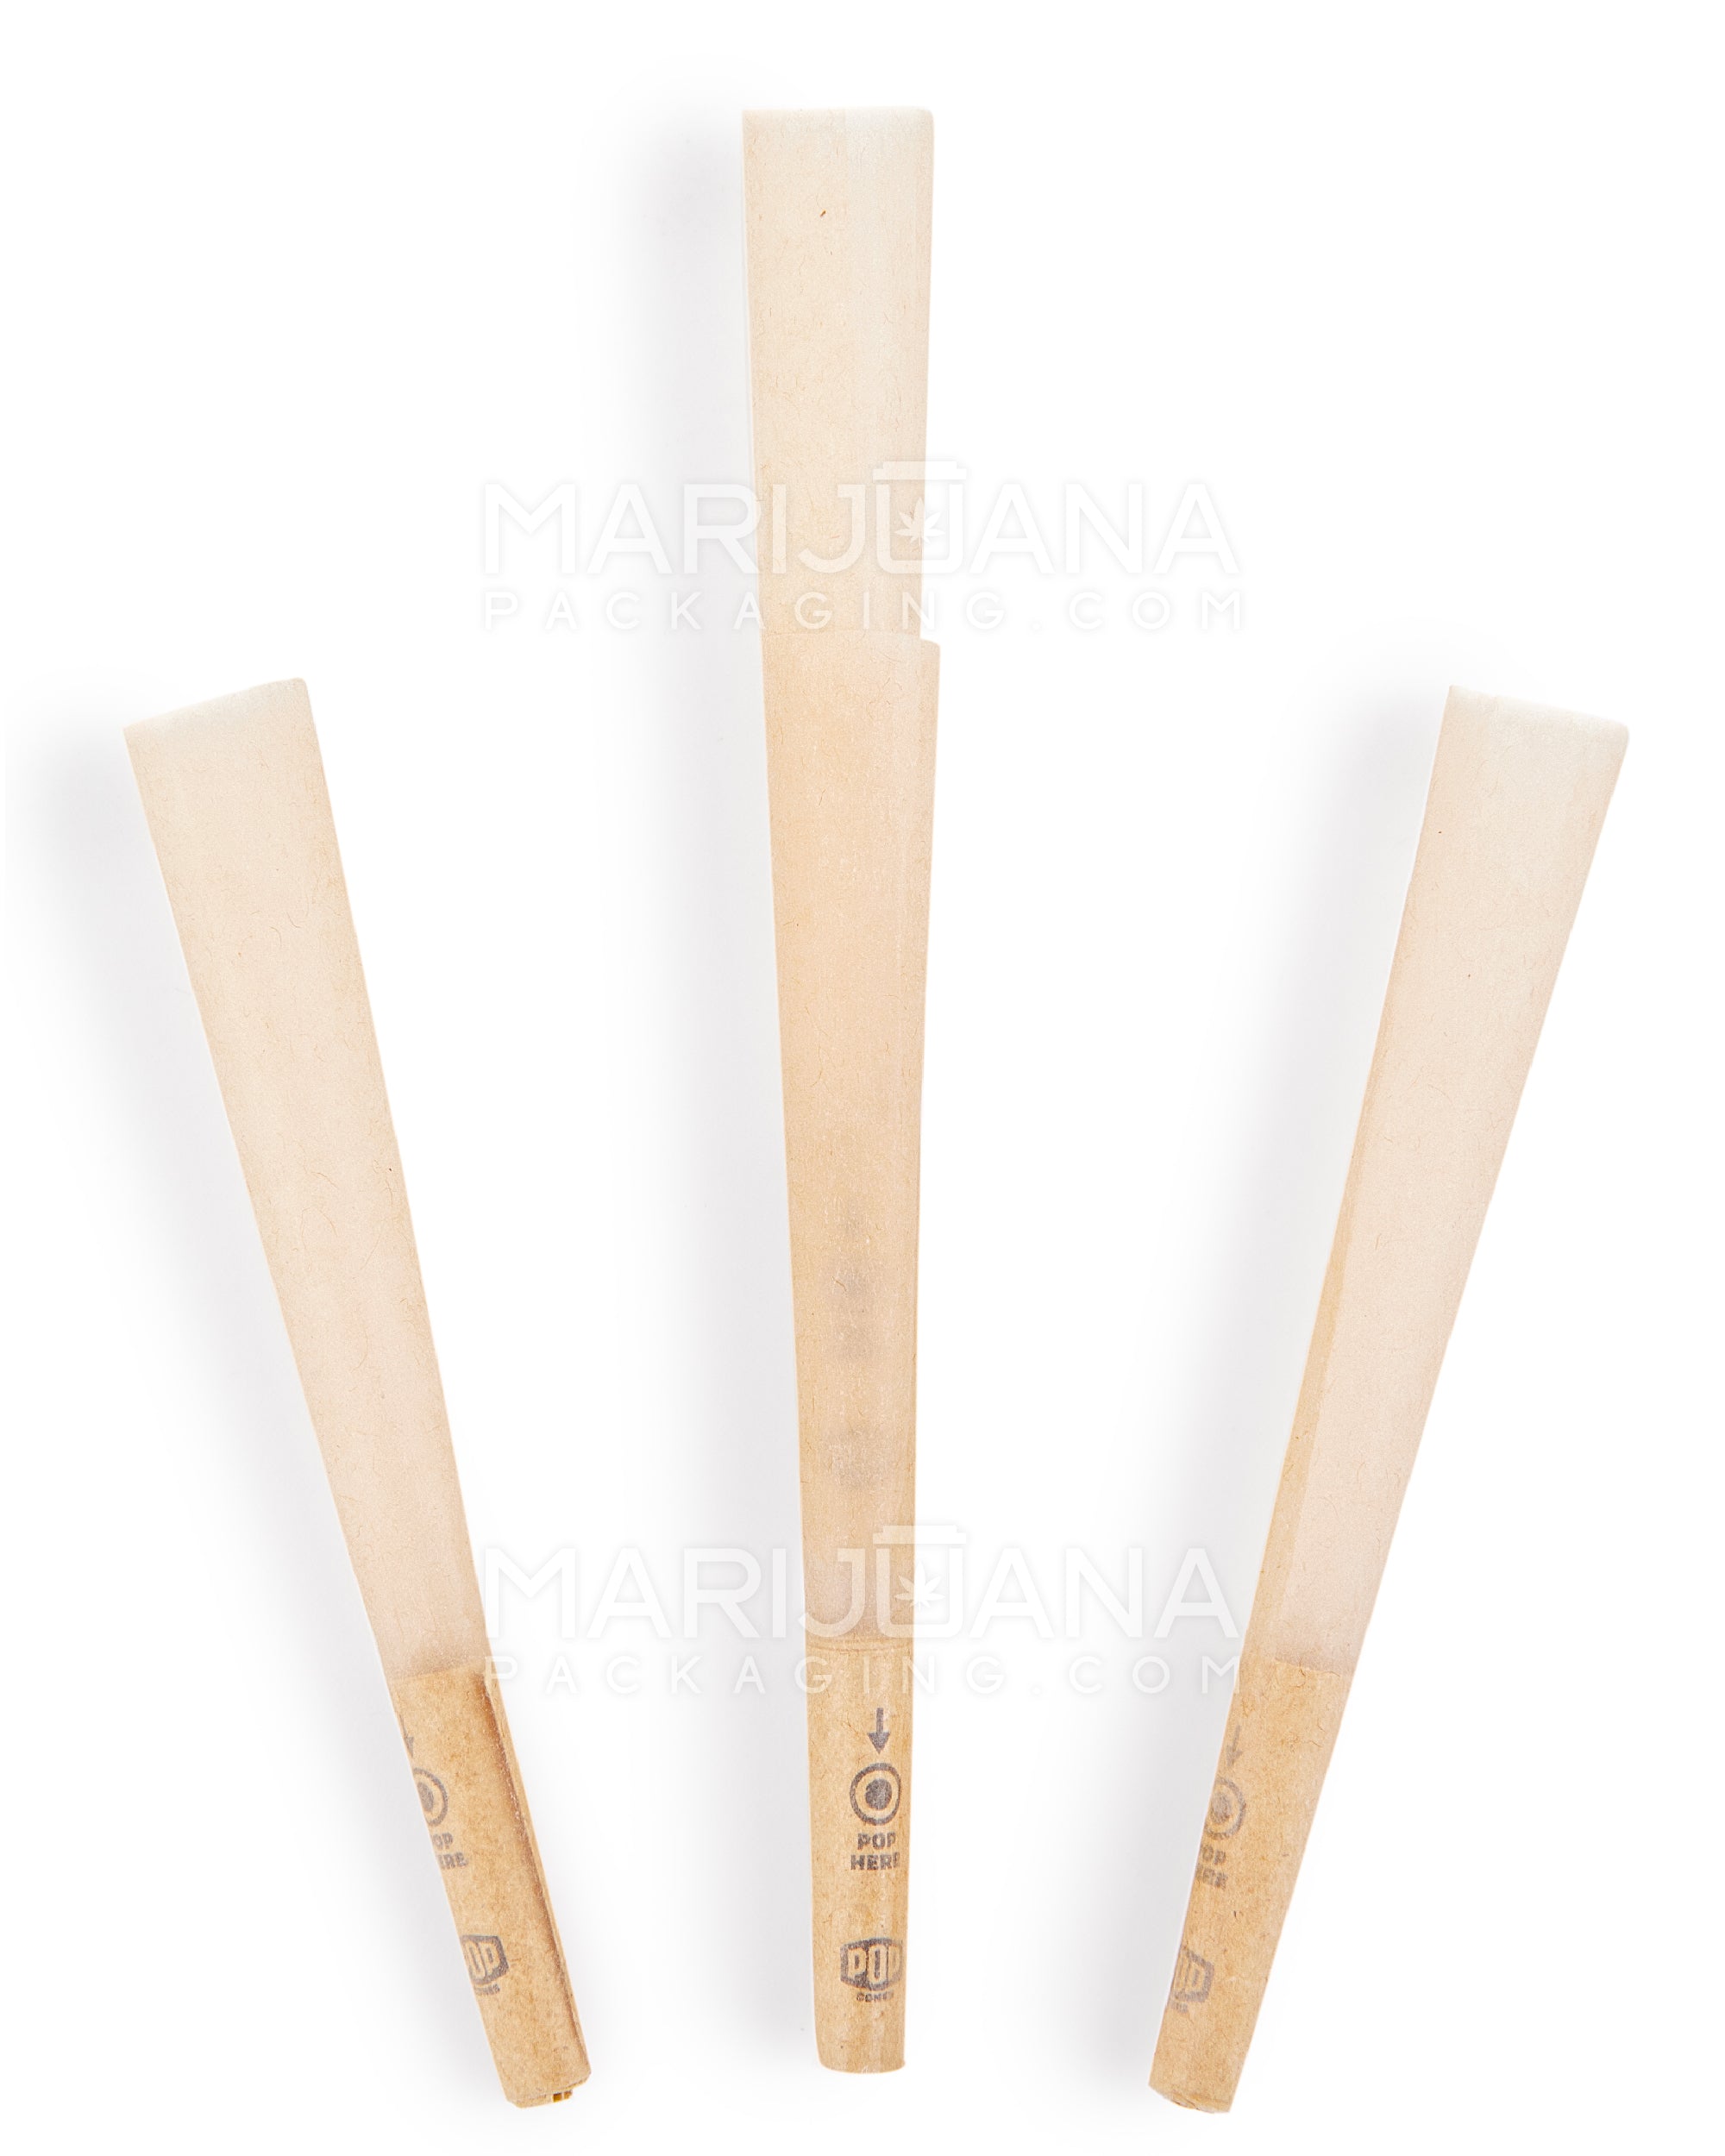 POP CONES | 'Retail Display' 1 1/4 Size Pre-Rolled Cones | 84mm - Strawberry Jam - 24 Count - 4